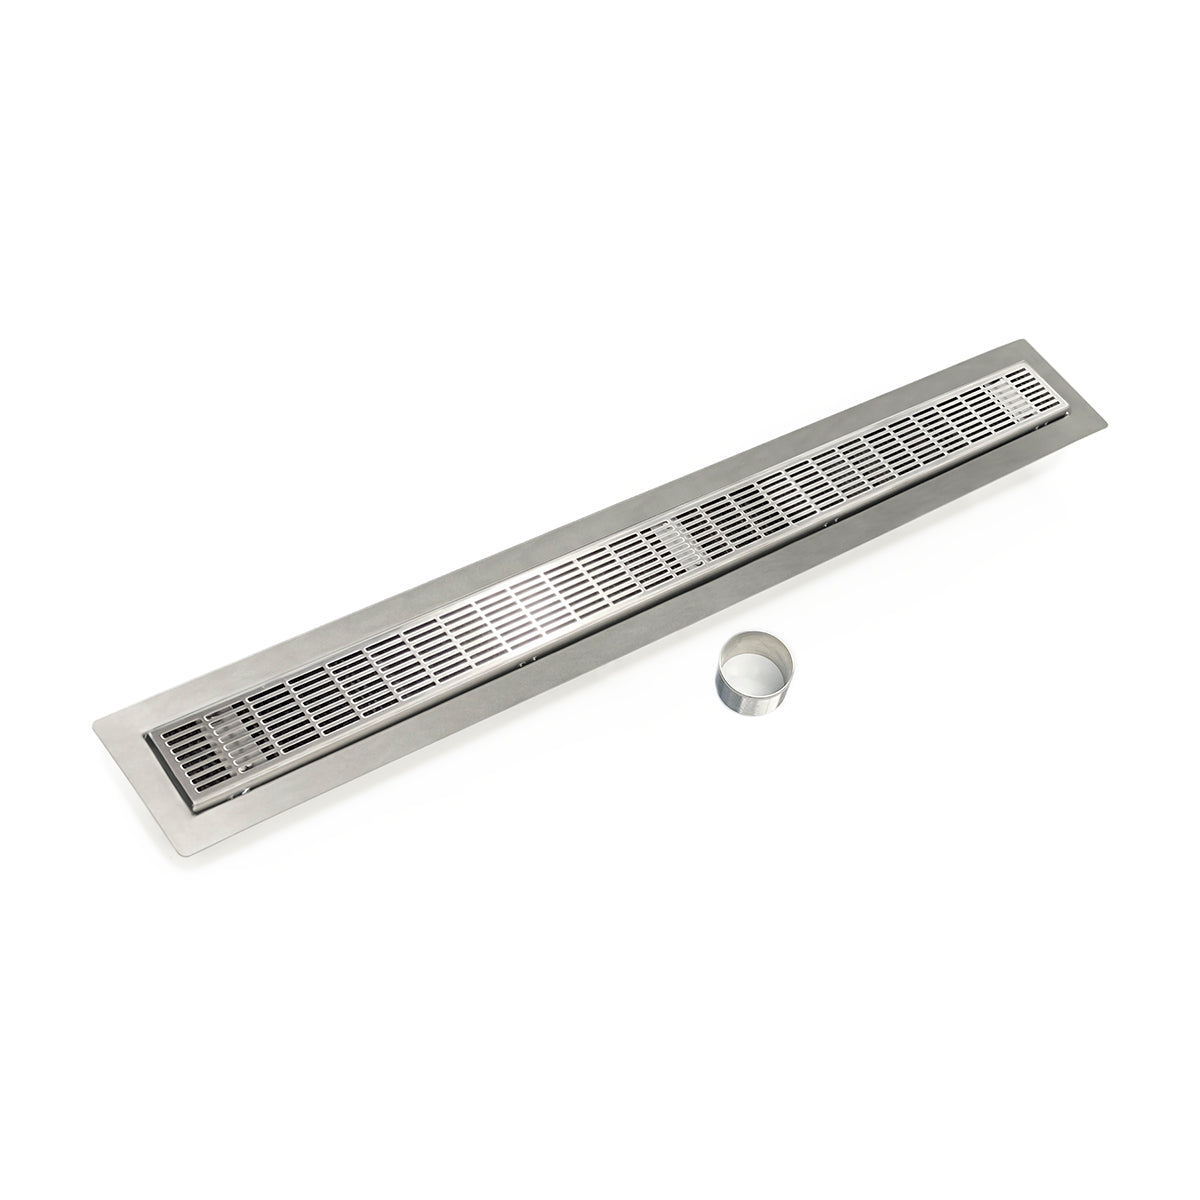 Infinity Drain 48" FCB Series Double Waterproofing Linear Drain Kit with 2 1/2" Perforated Slotted Grate